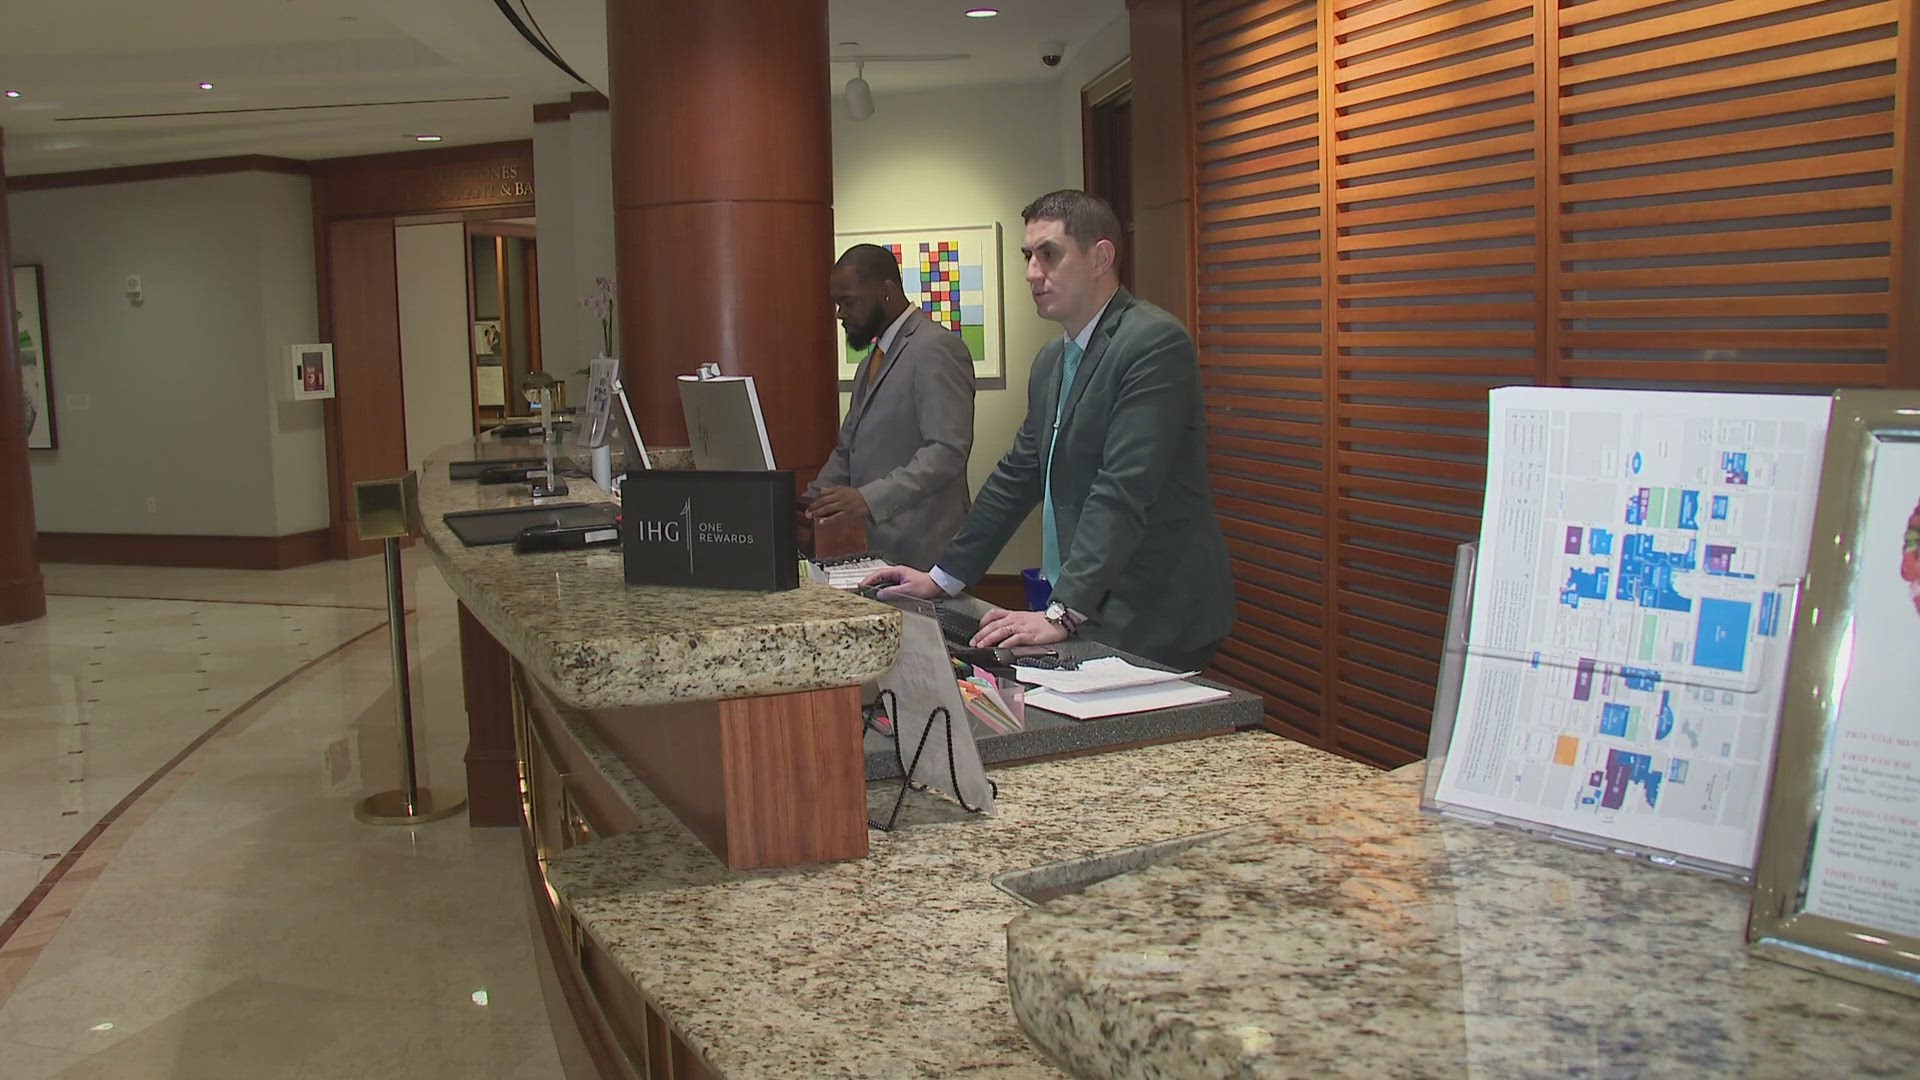 The city of Cleveland is bracing for a lot of visitors this year, however hotels are in need of workers.